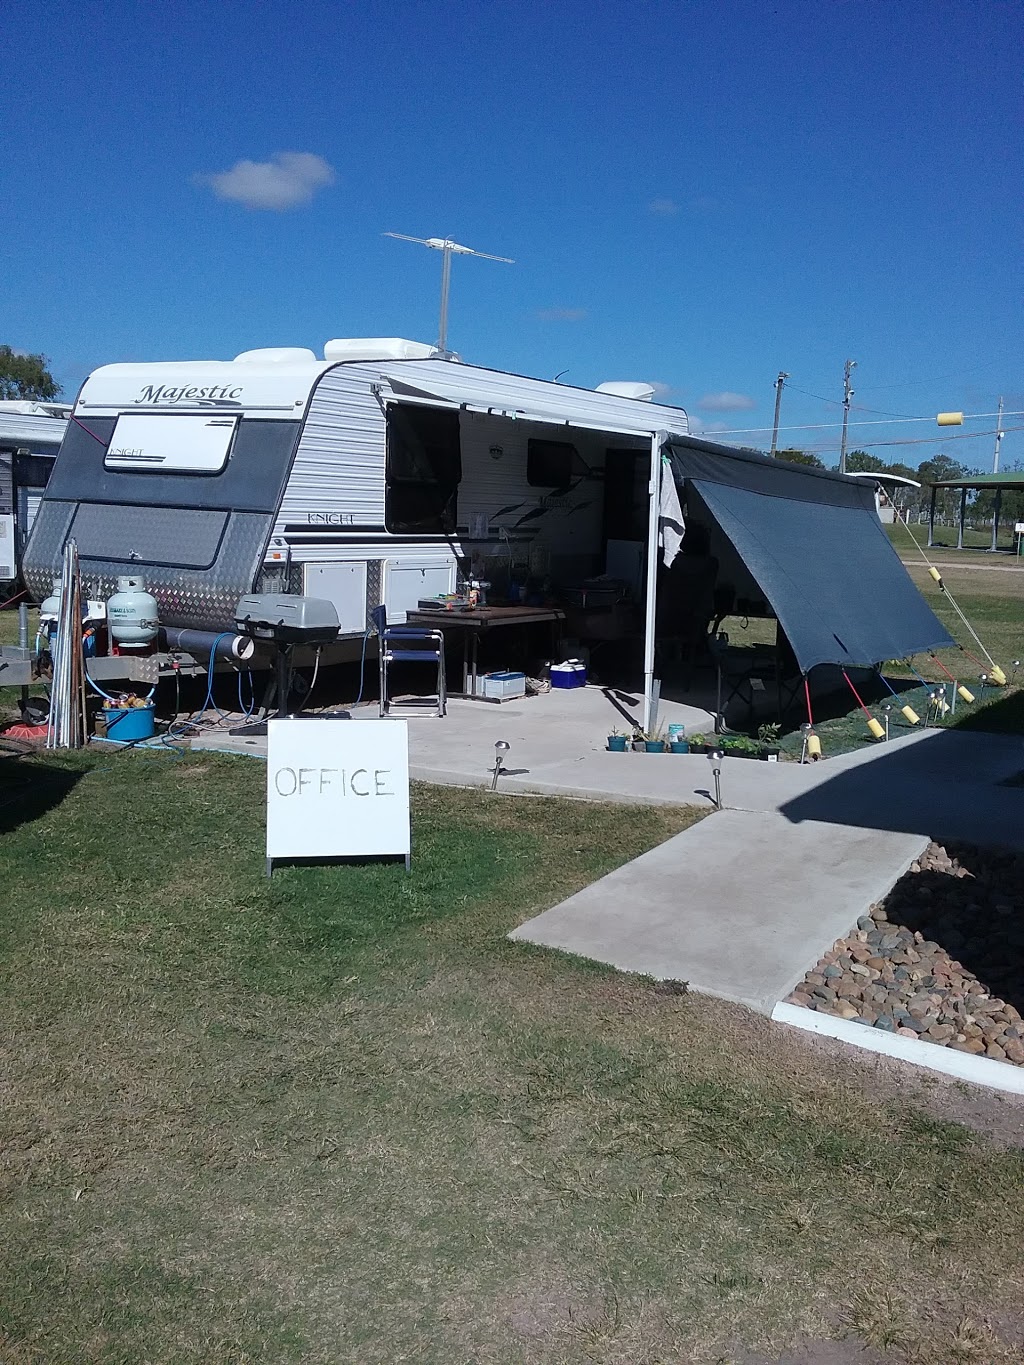 Home Hill Showgrounds | campground | Sixth Ave, Home Hill QLD 4806, Australia | 0414490016 OR +61 414 490 016